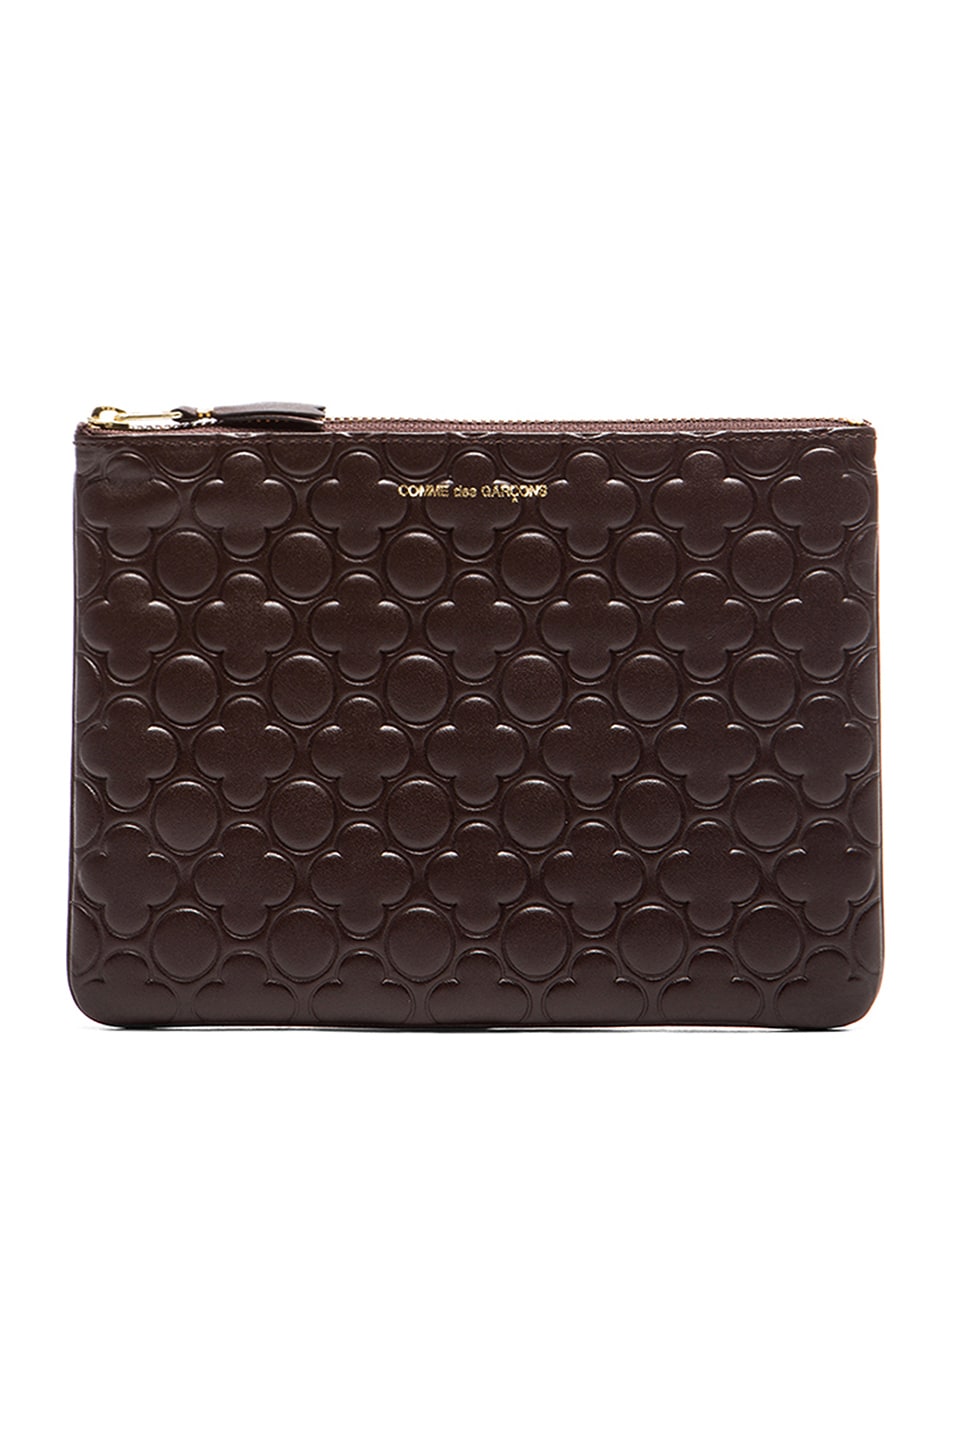 Image 1 of COMME des GARCONS Clover Embossed Pouch in Brown